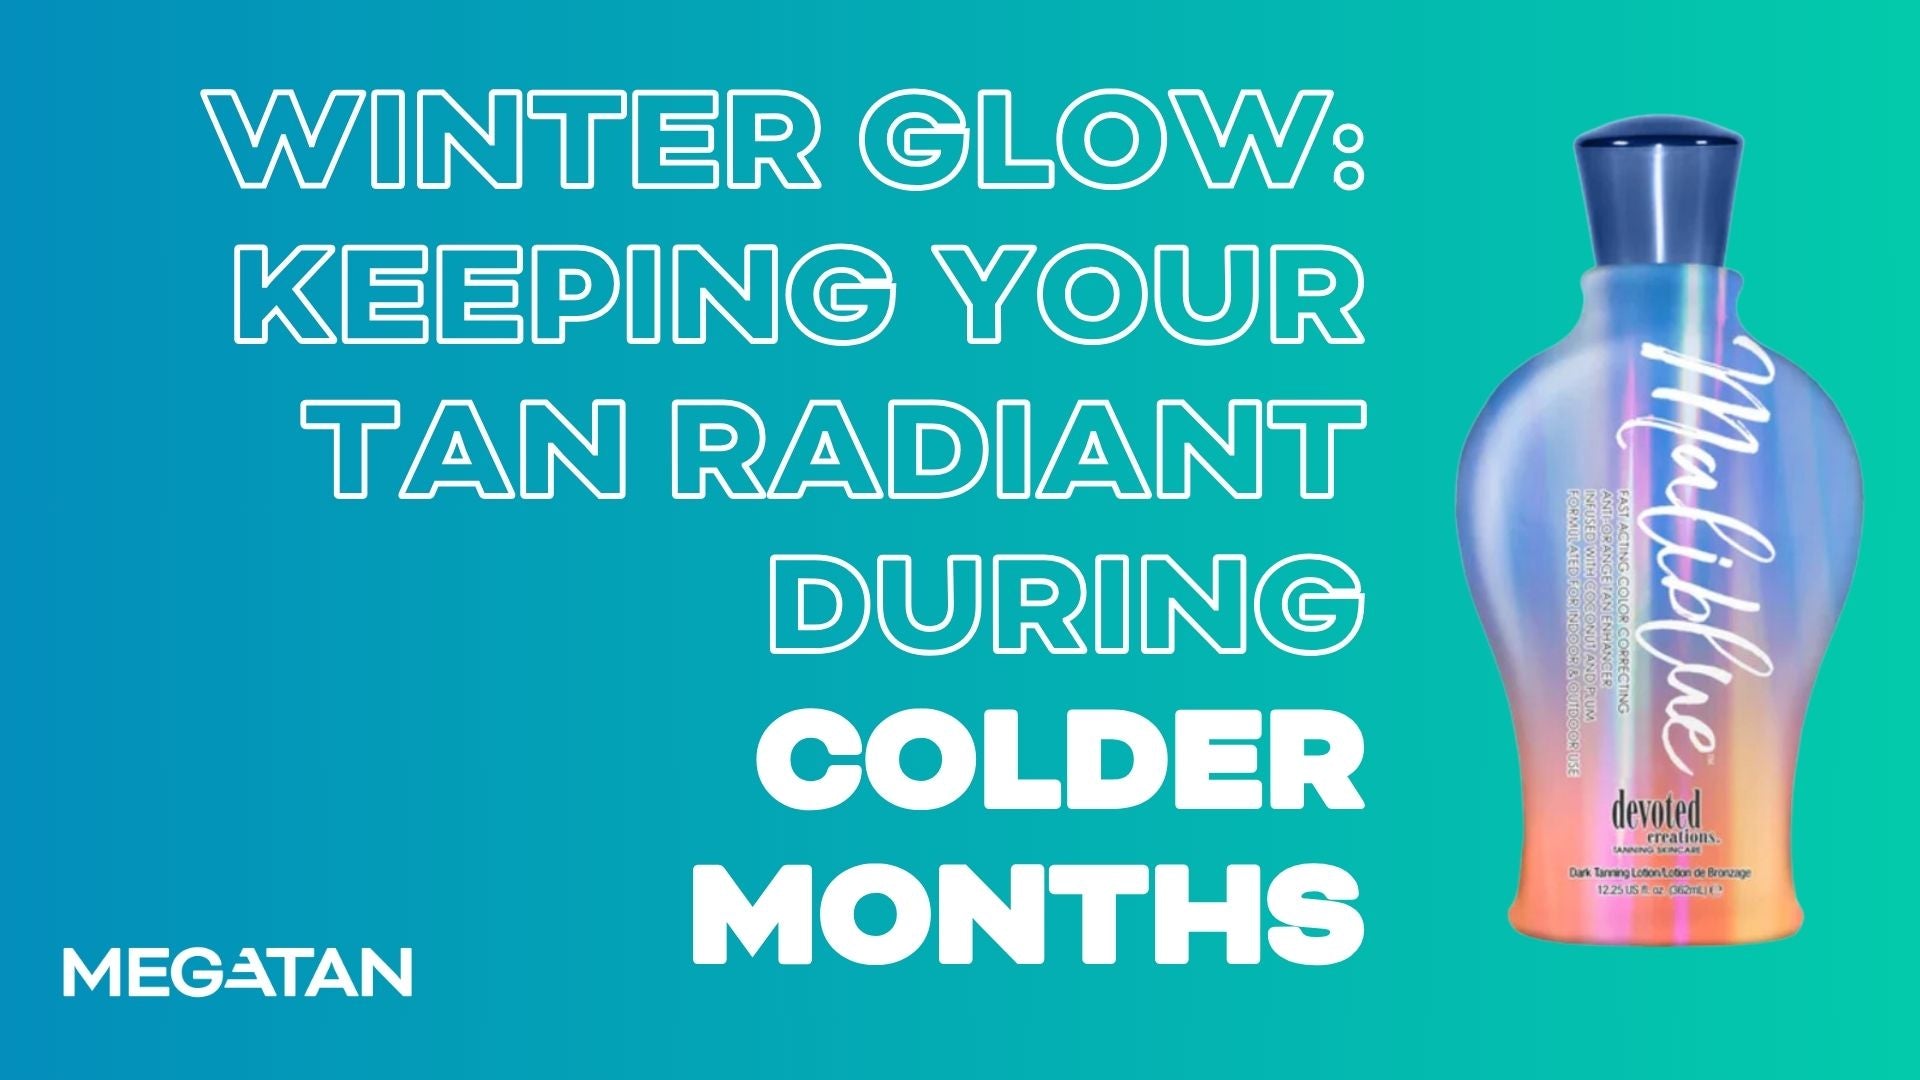 Winter Glow: Keeping Your Tan Radiant During Colder Months